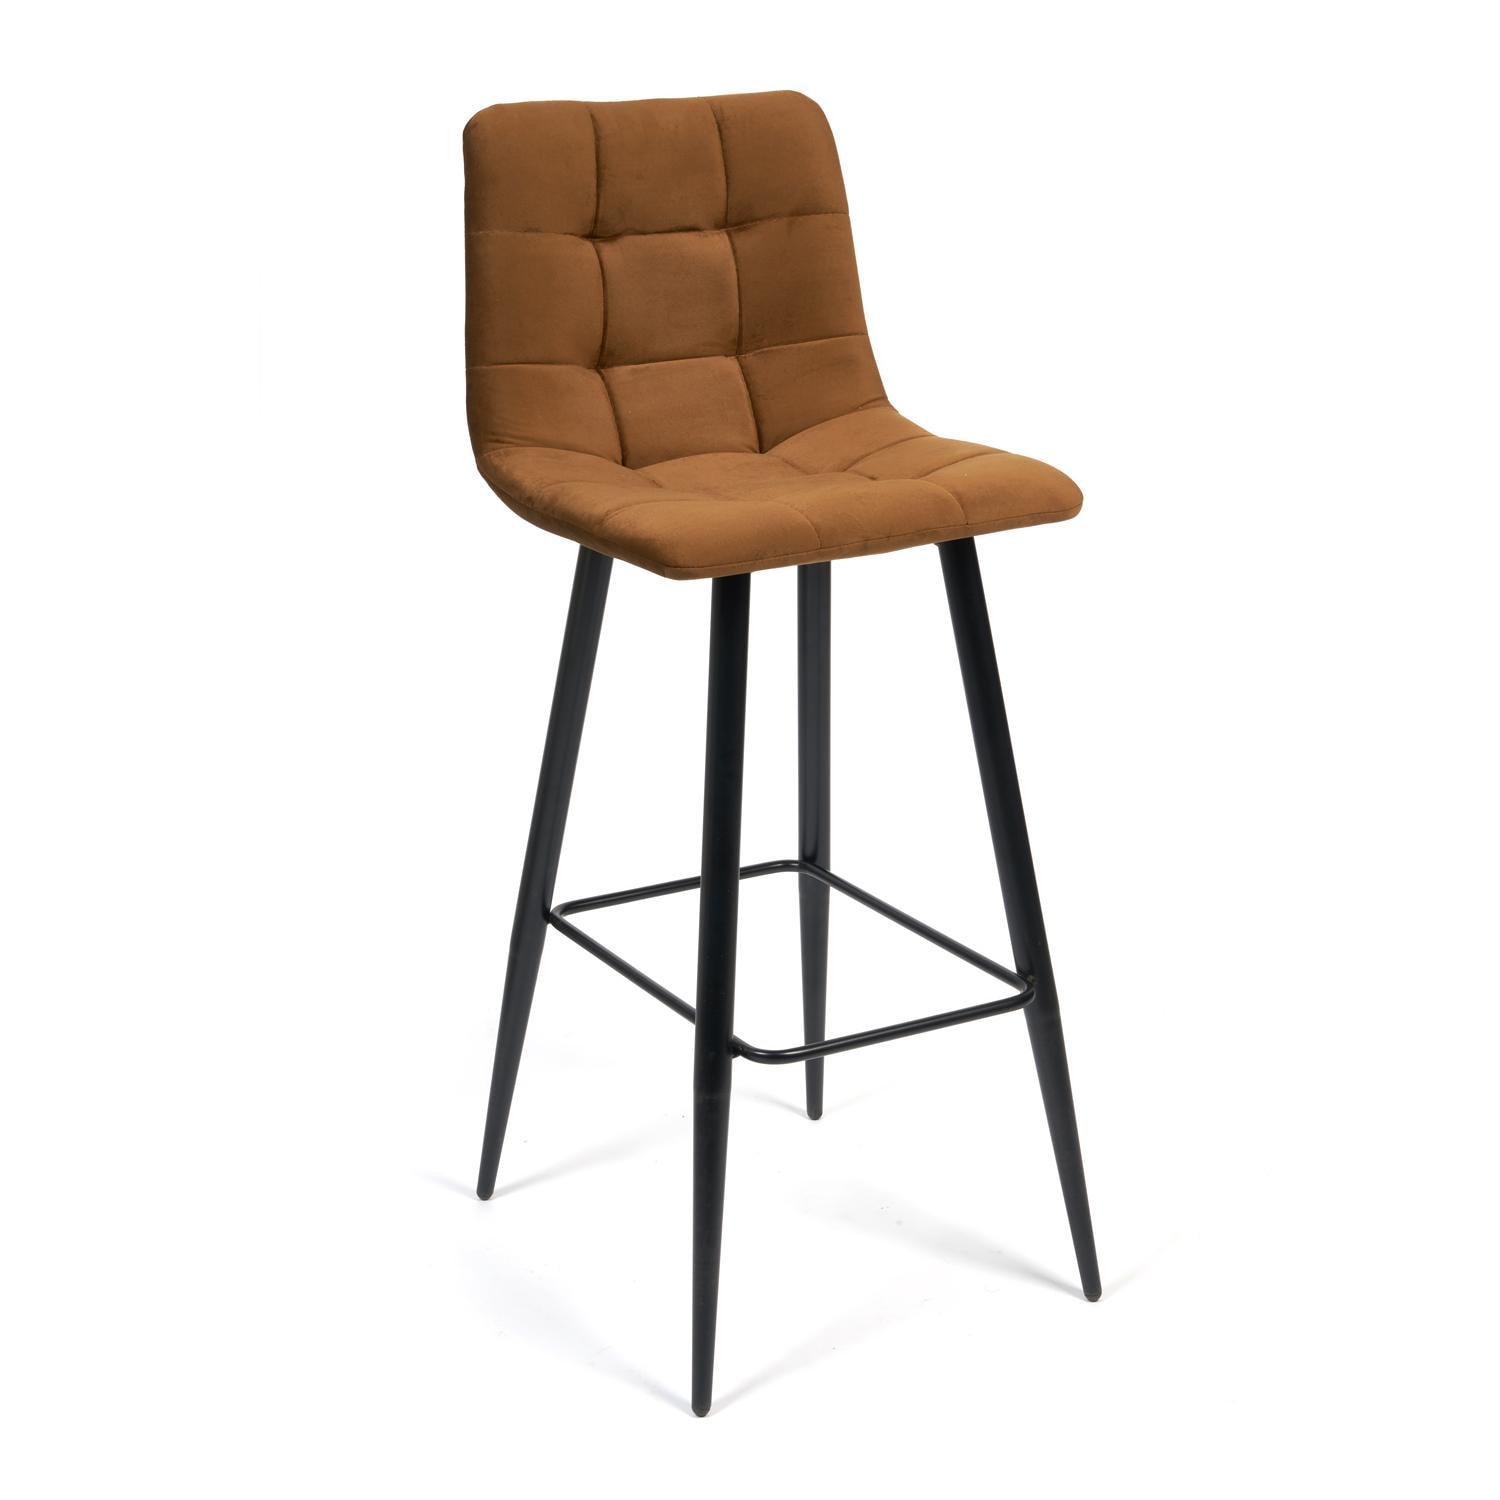   TetChair Chilly 7095 brown barkhat